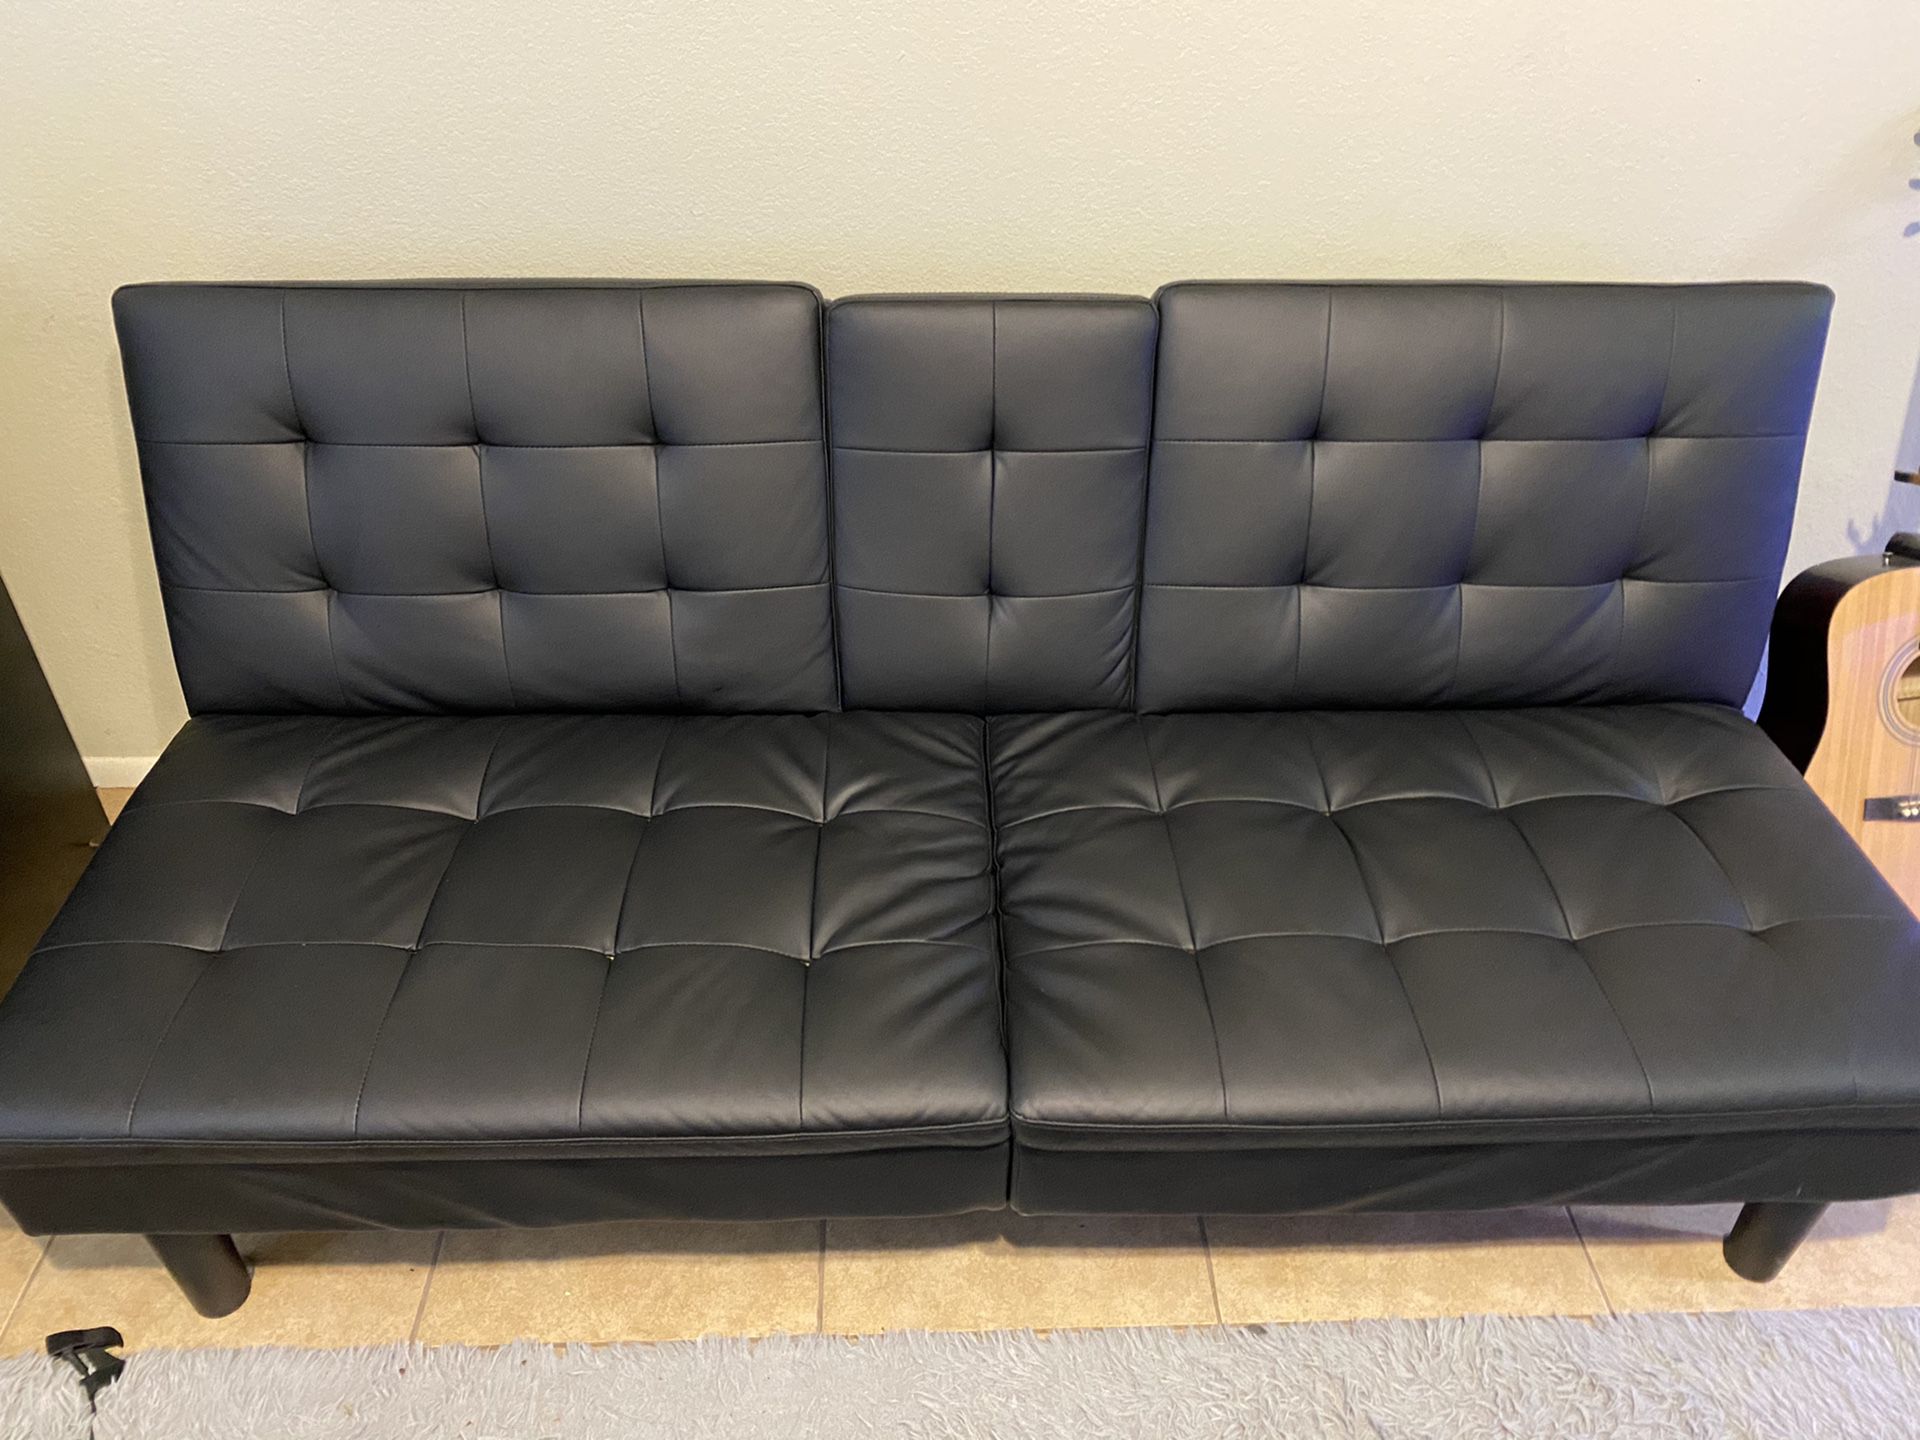 Mainstays Black Futon Faux Leather with Memory Foam